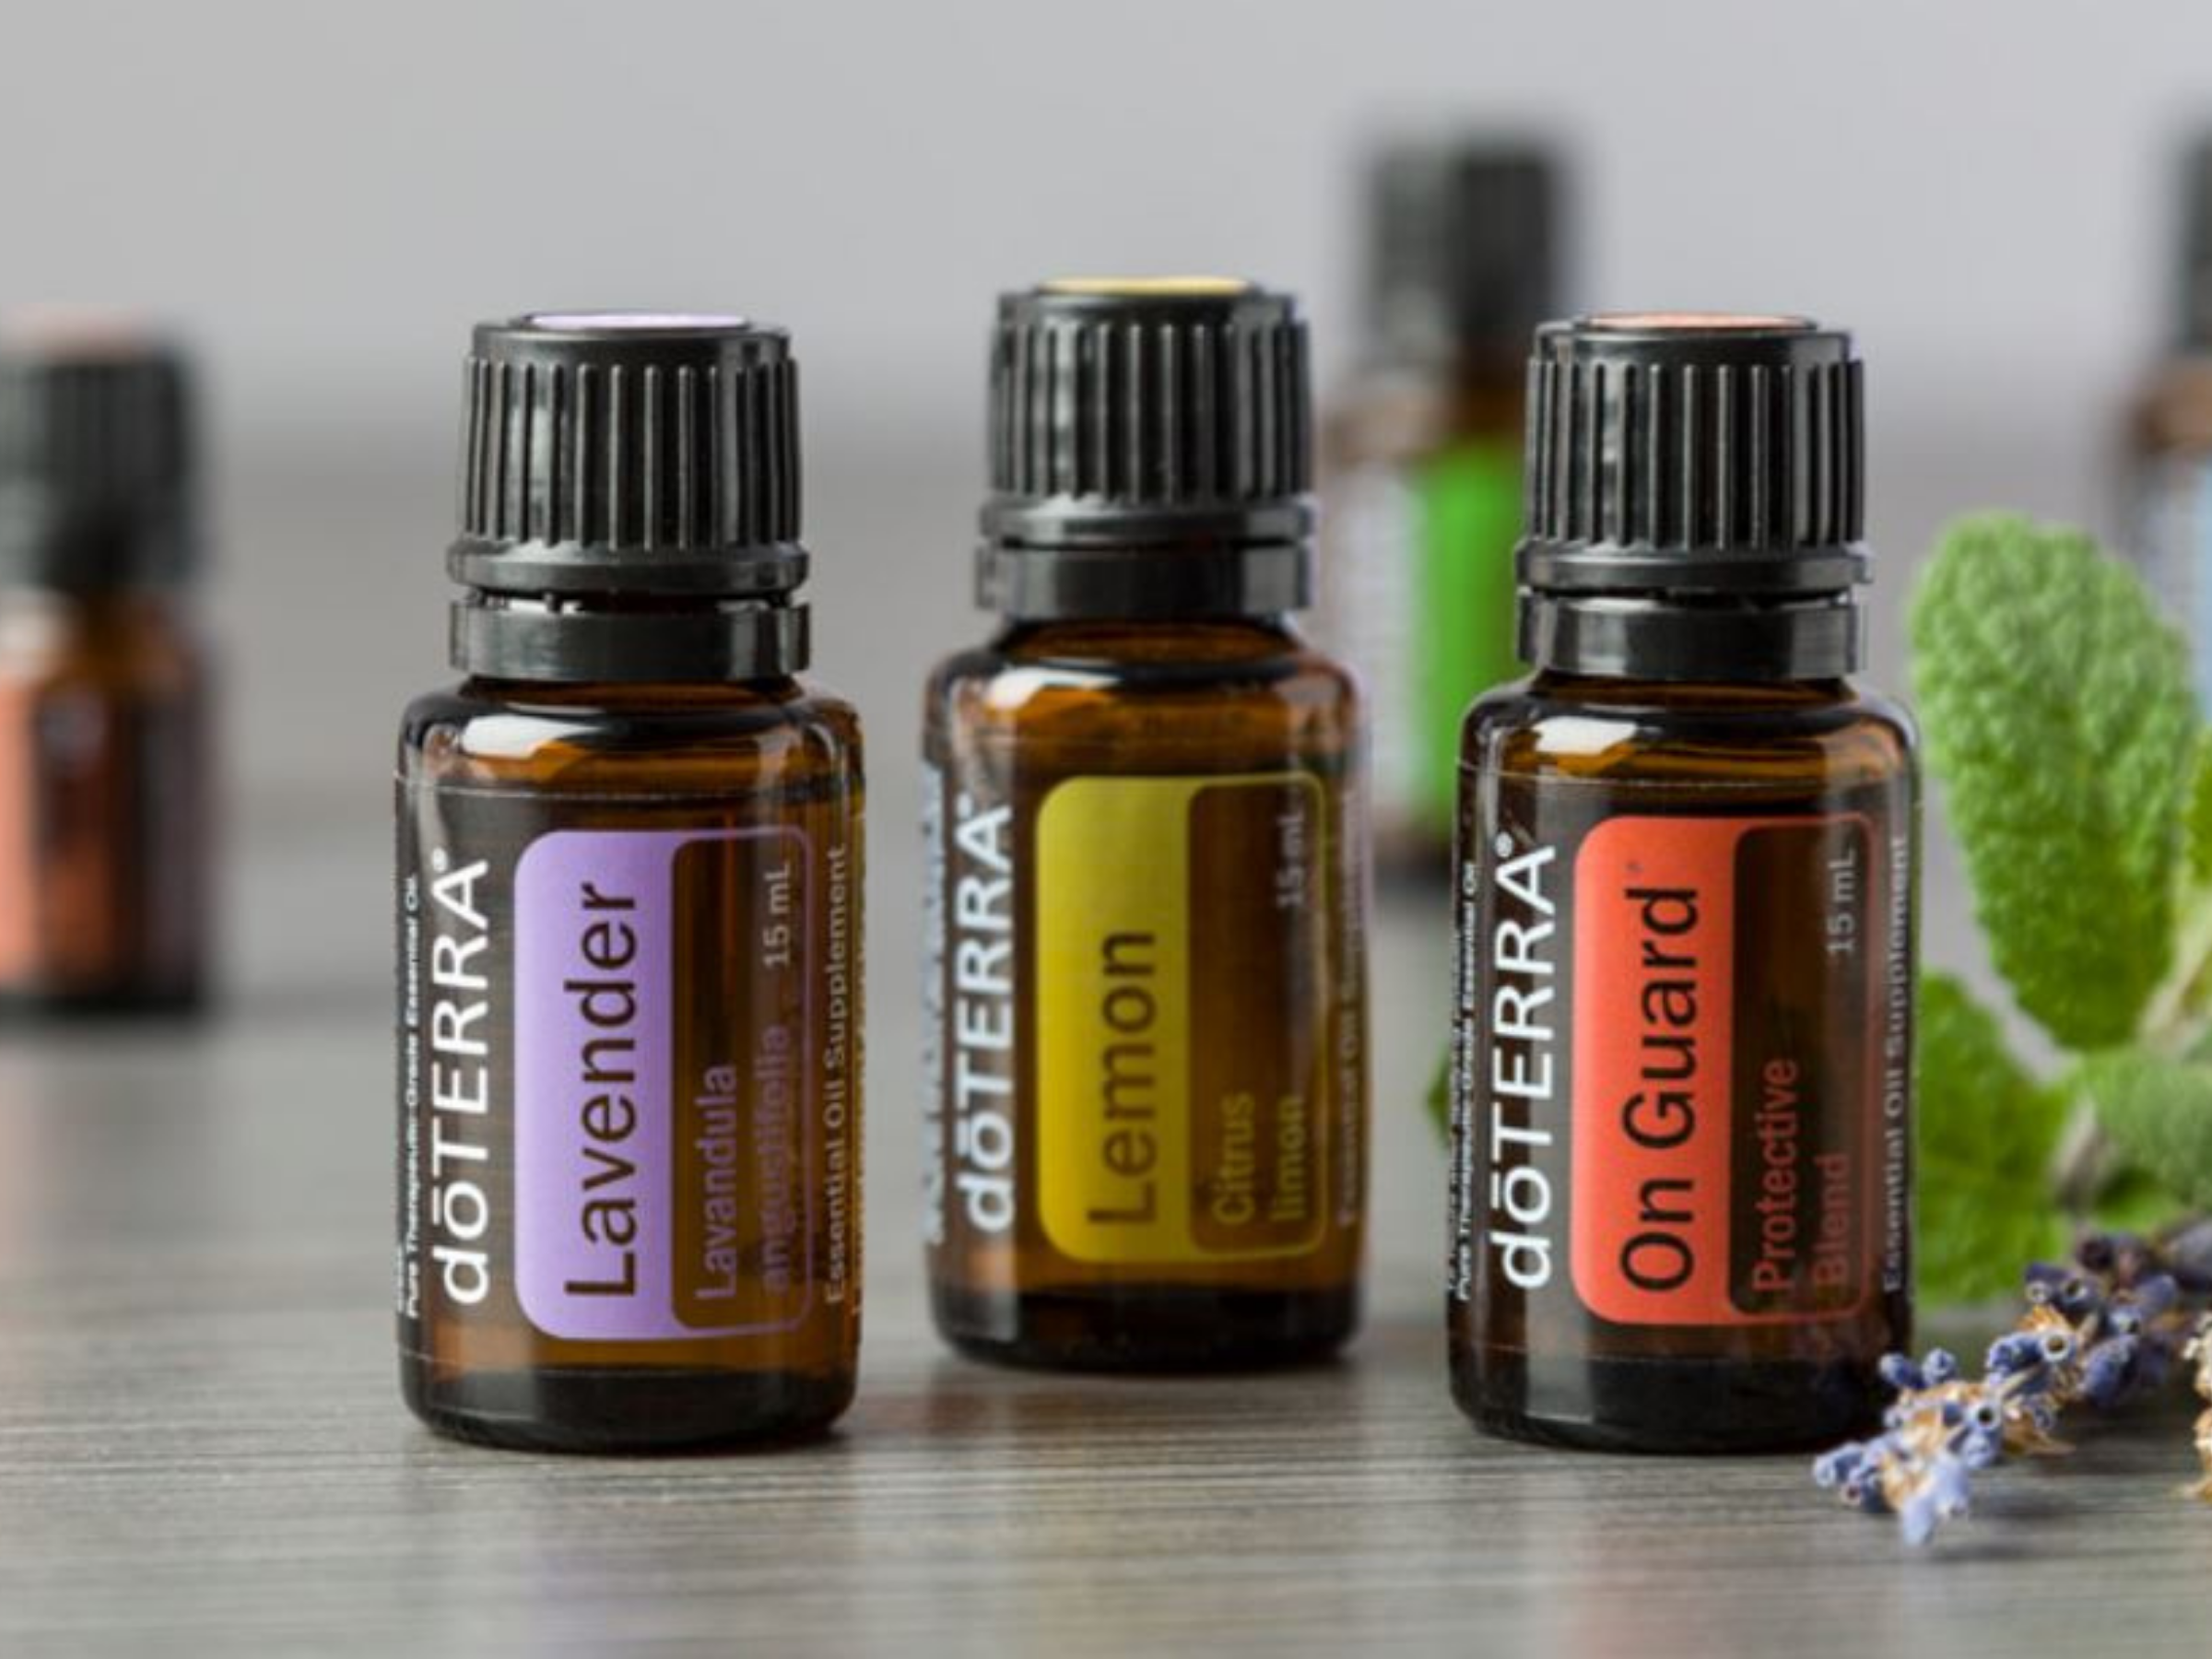 Doterra Essential oils can be used for a wide range of emotional and physical wellness applications. 